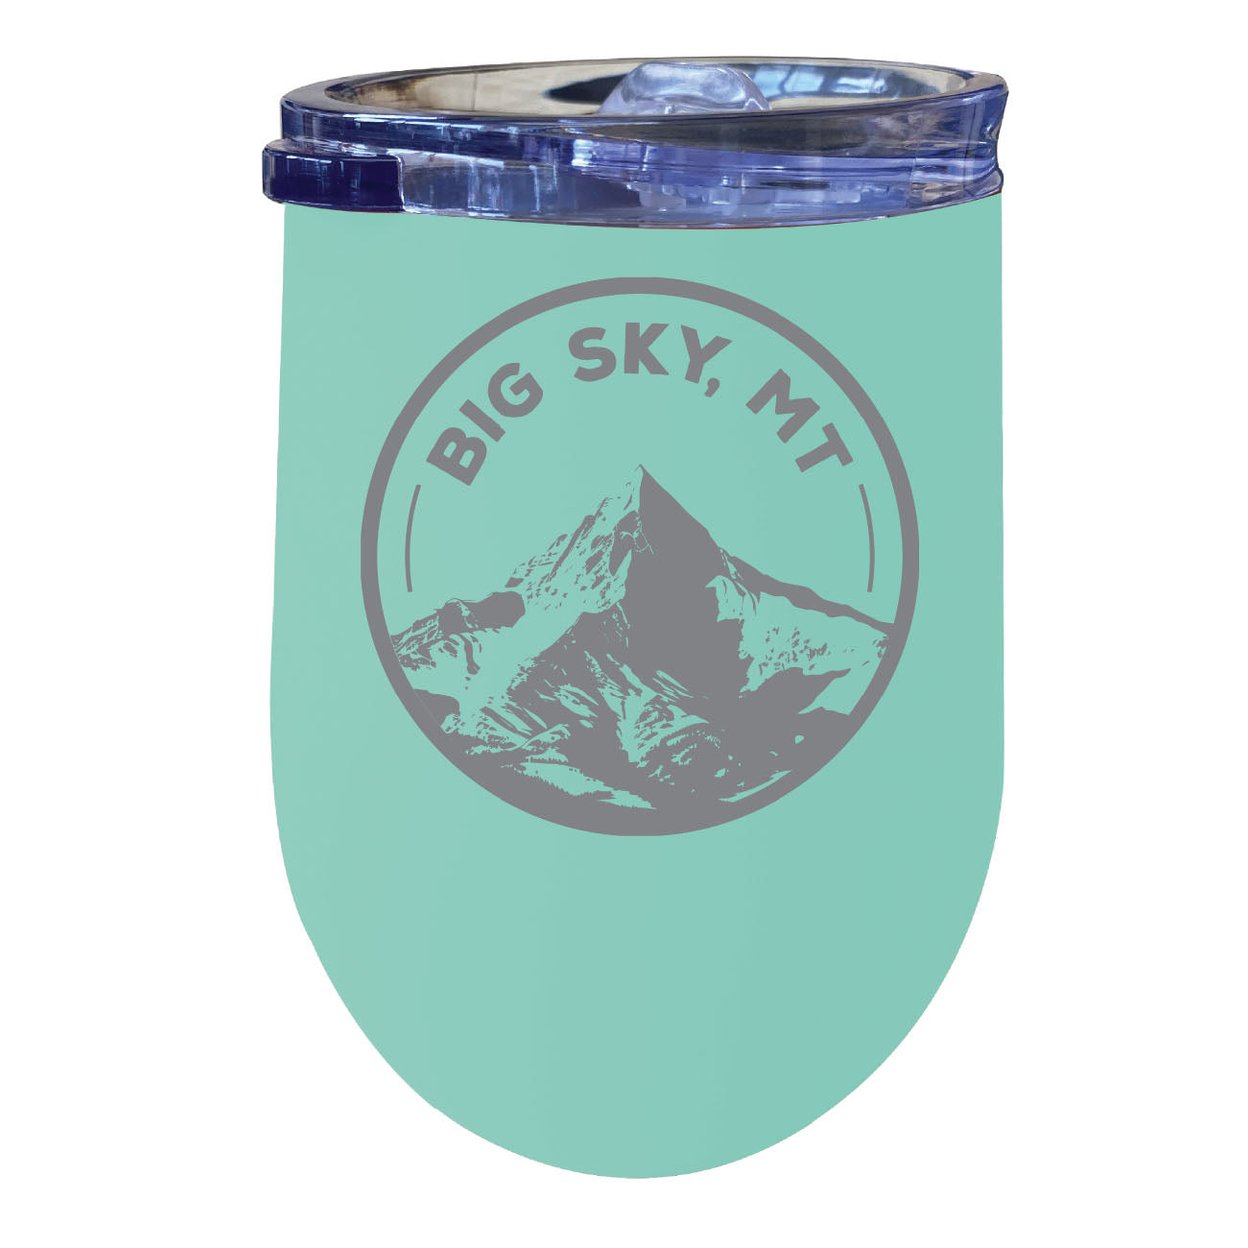 Big Sky Montana Souvenir 12 Oz Engraved Insulated Wine Stainless Steel Tumbler - Navy,,2-Pack